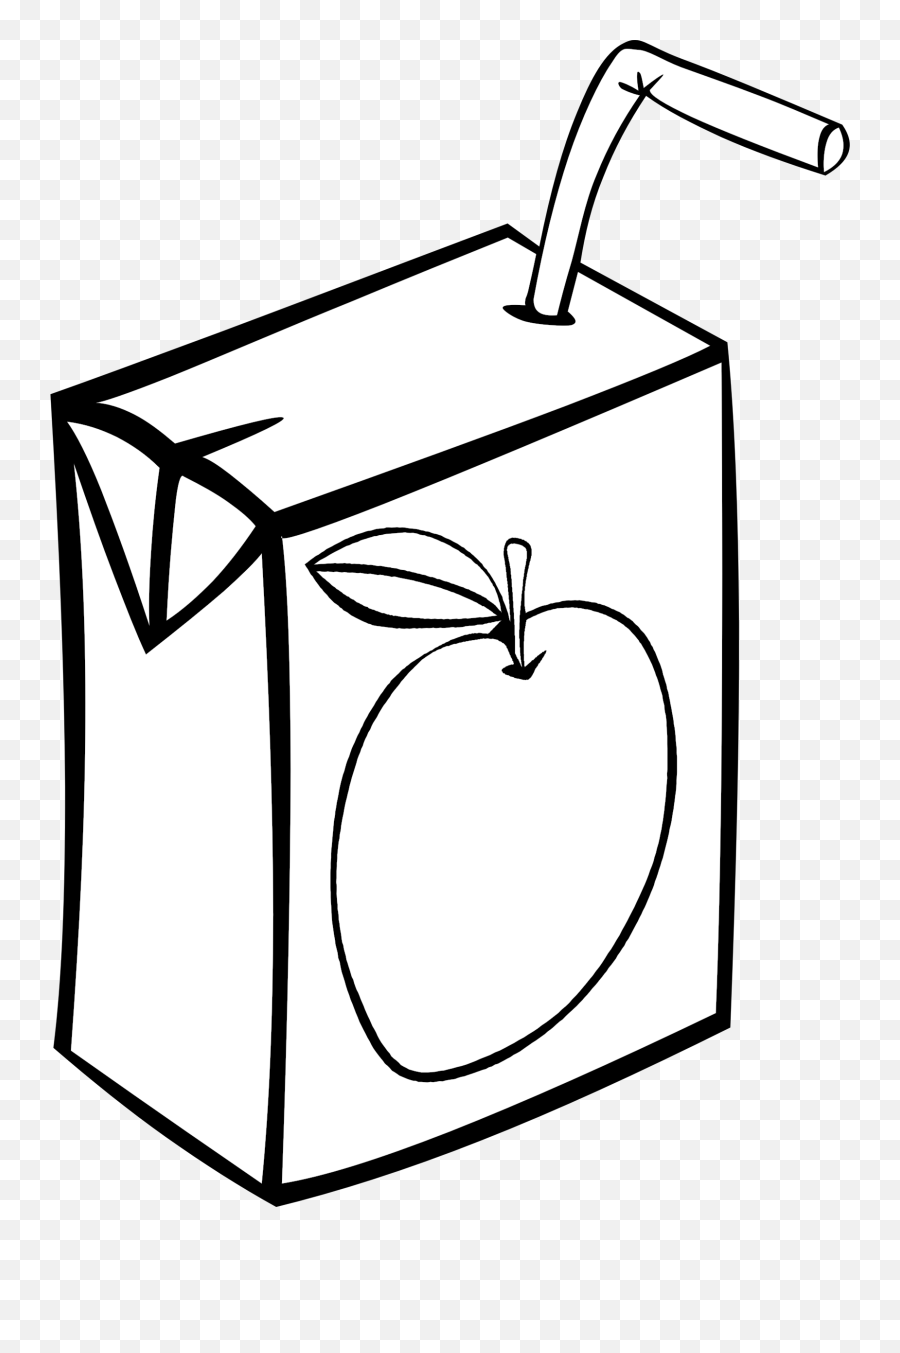 Free Clipart Black And White Apple - Juice Box Emoji,Apple Clipart Black And White